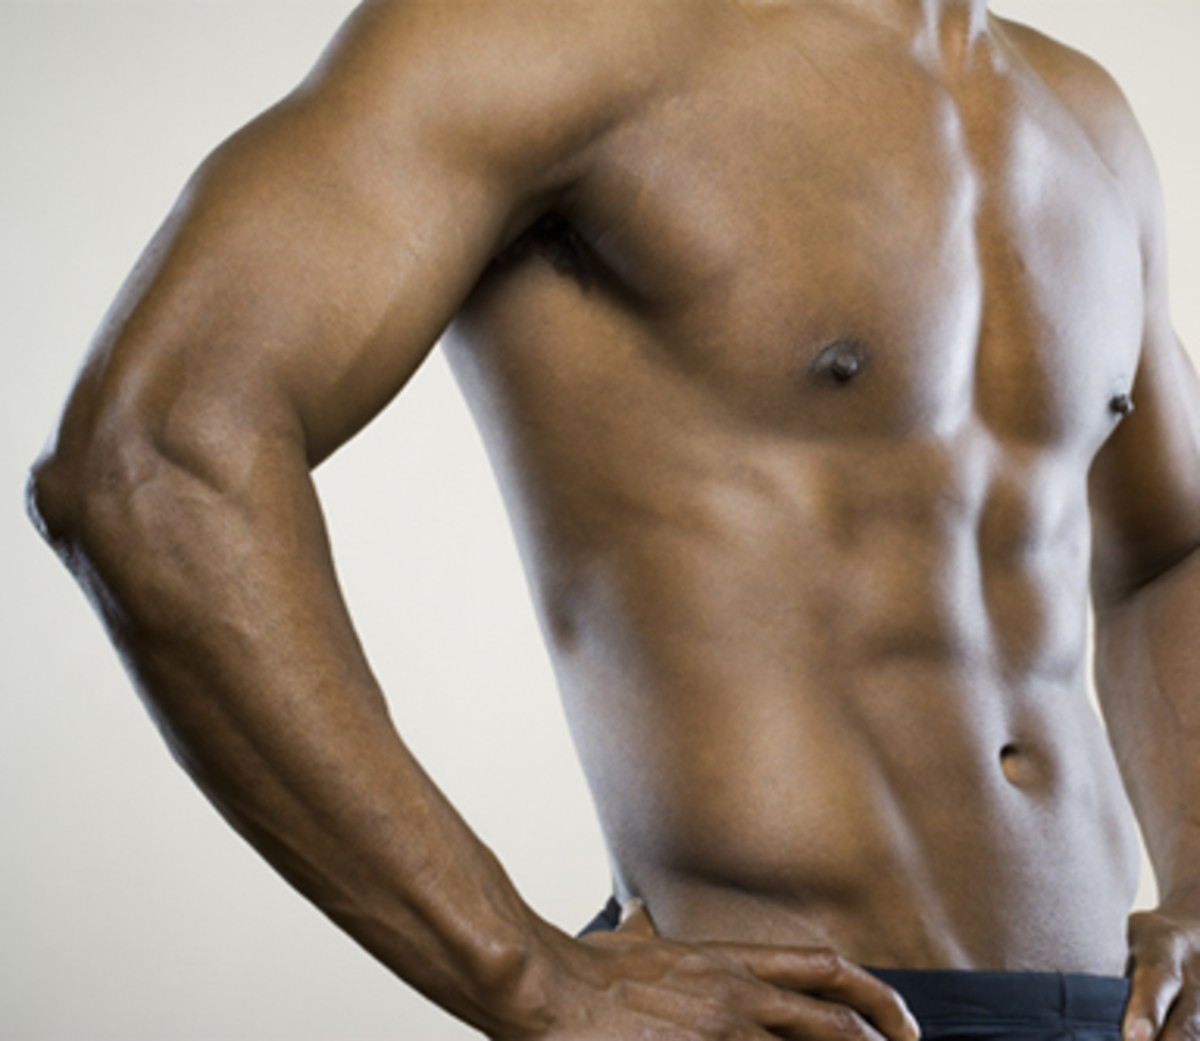 Why do some people have 6 packs abs and some have 8 pack abs? - Quora